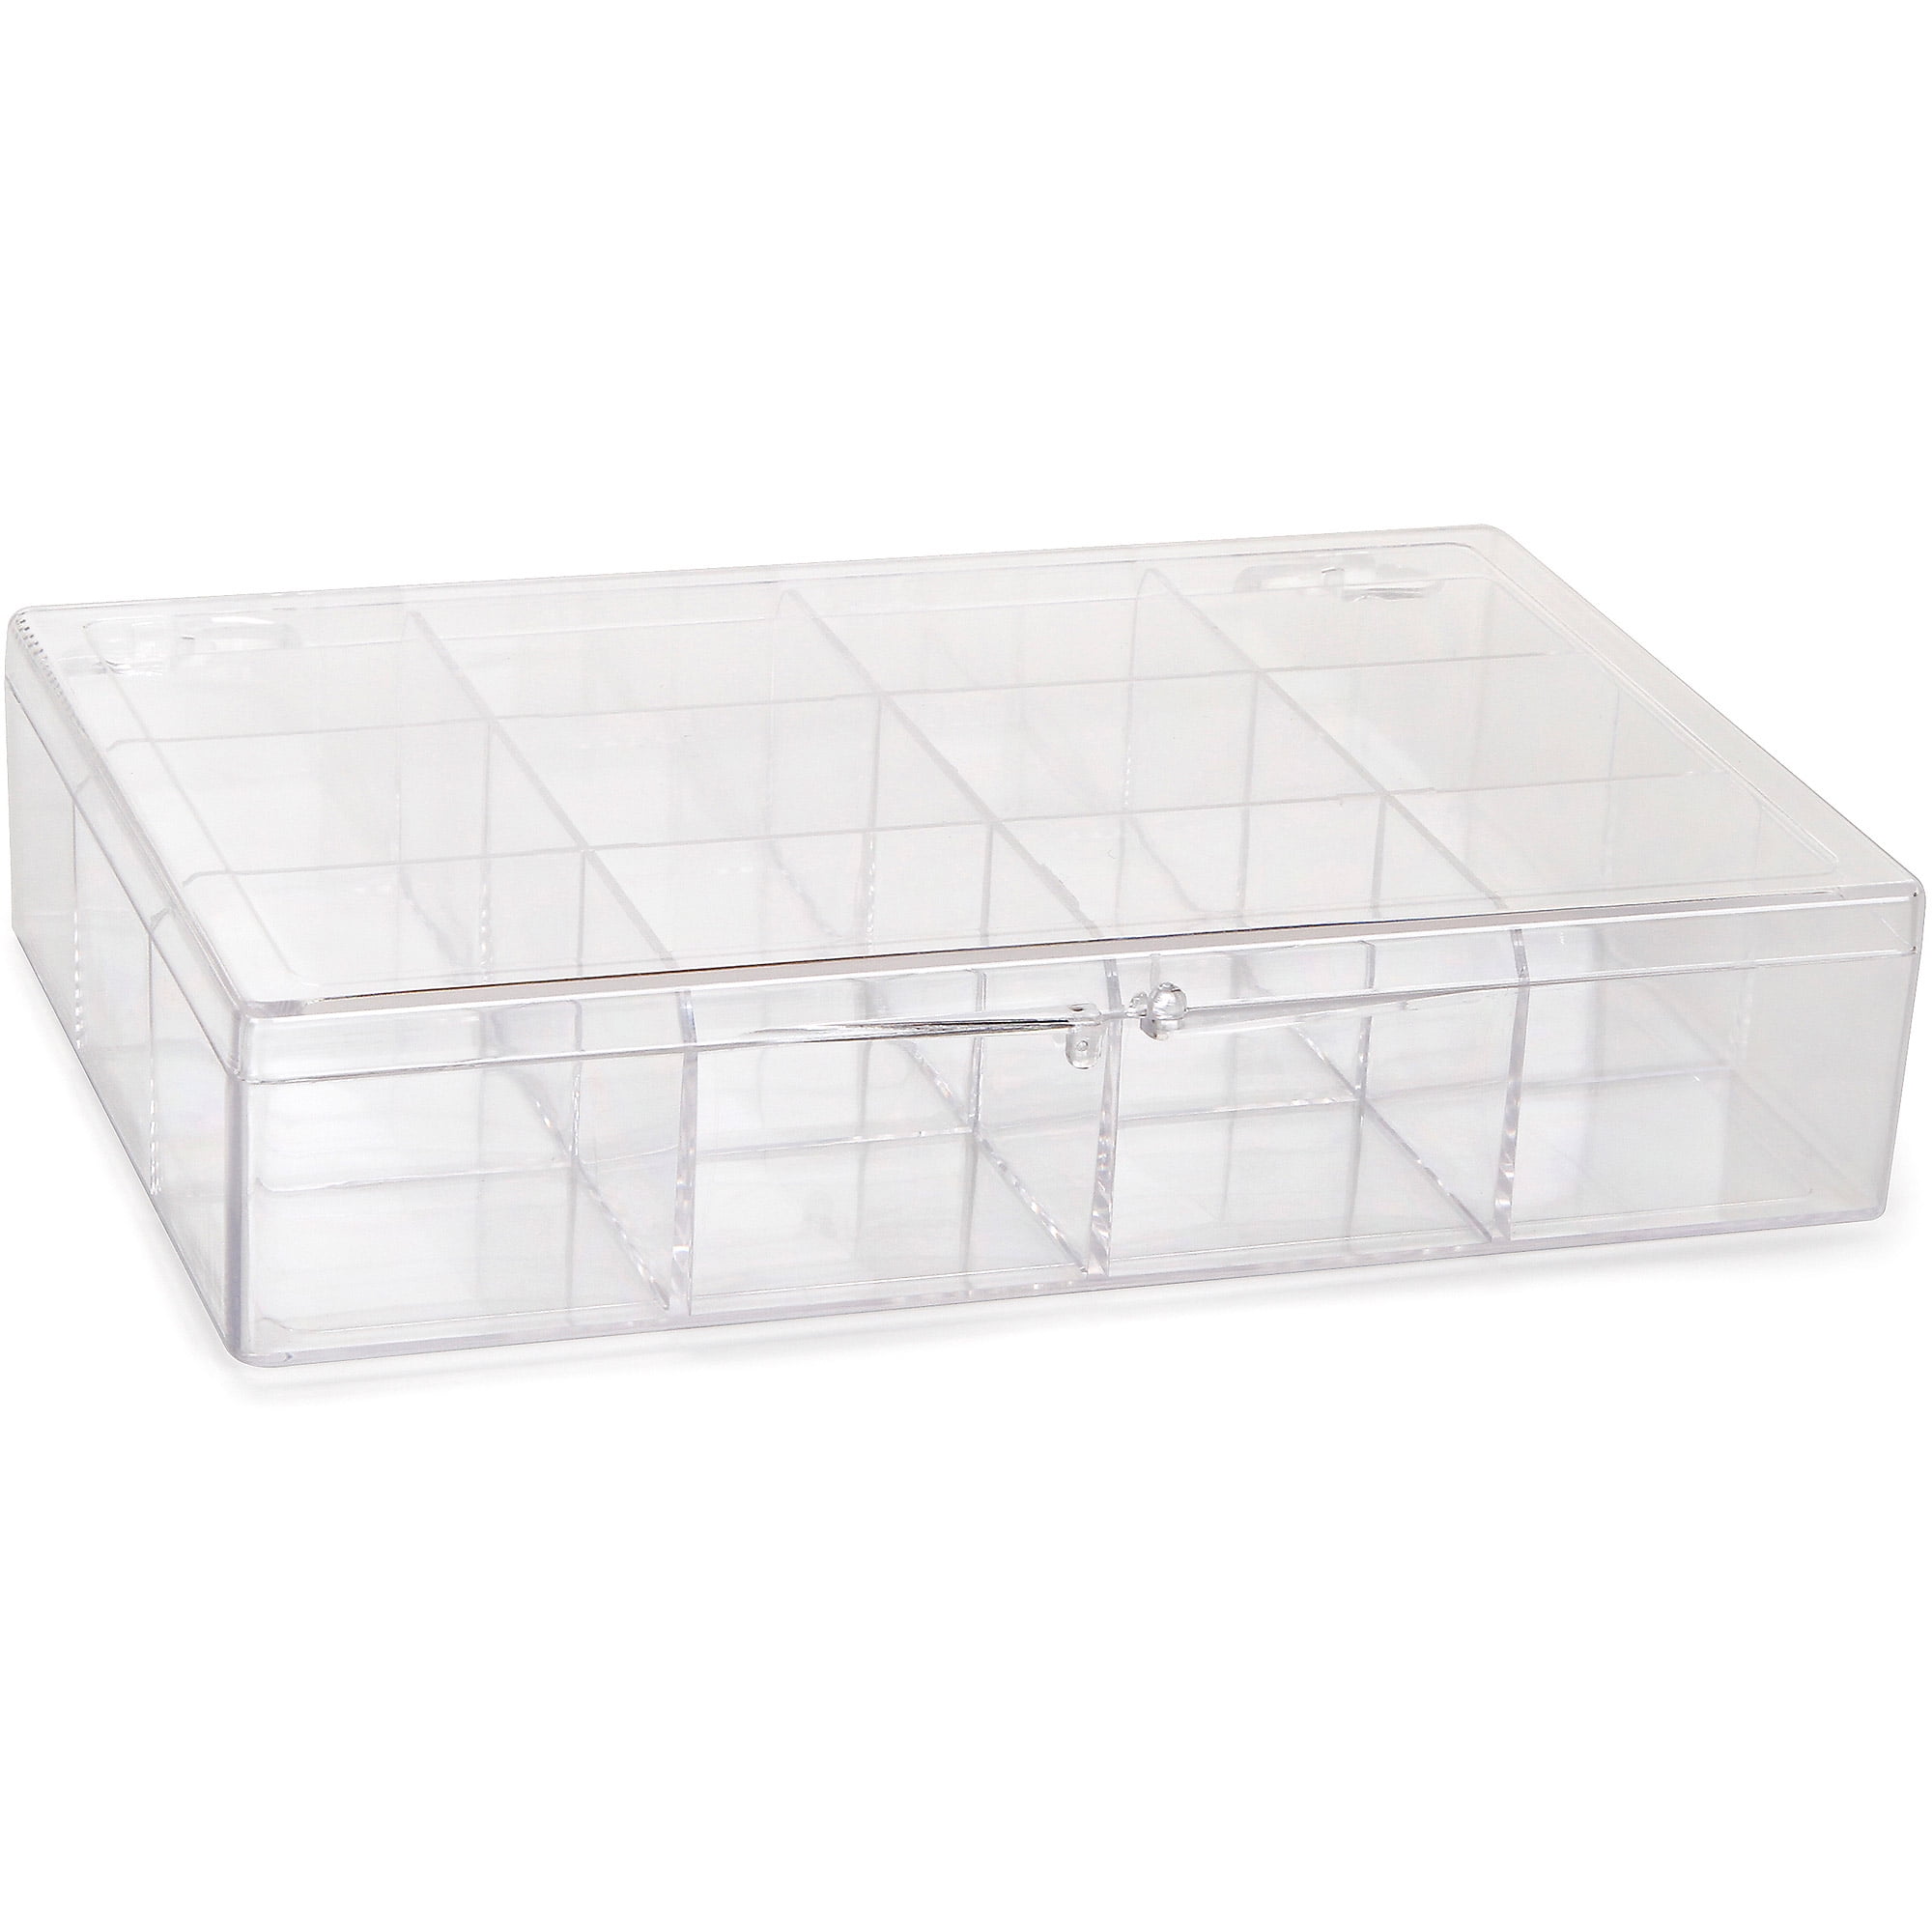 DUR Polypropylene Resin Compartment Box,12 Compartments,Clear Clear SP12-CLEAR 